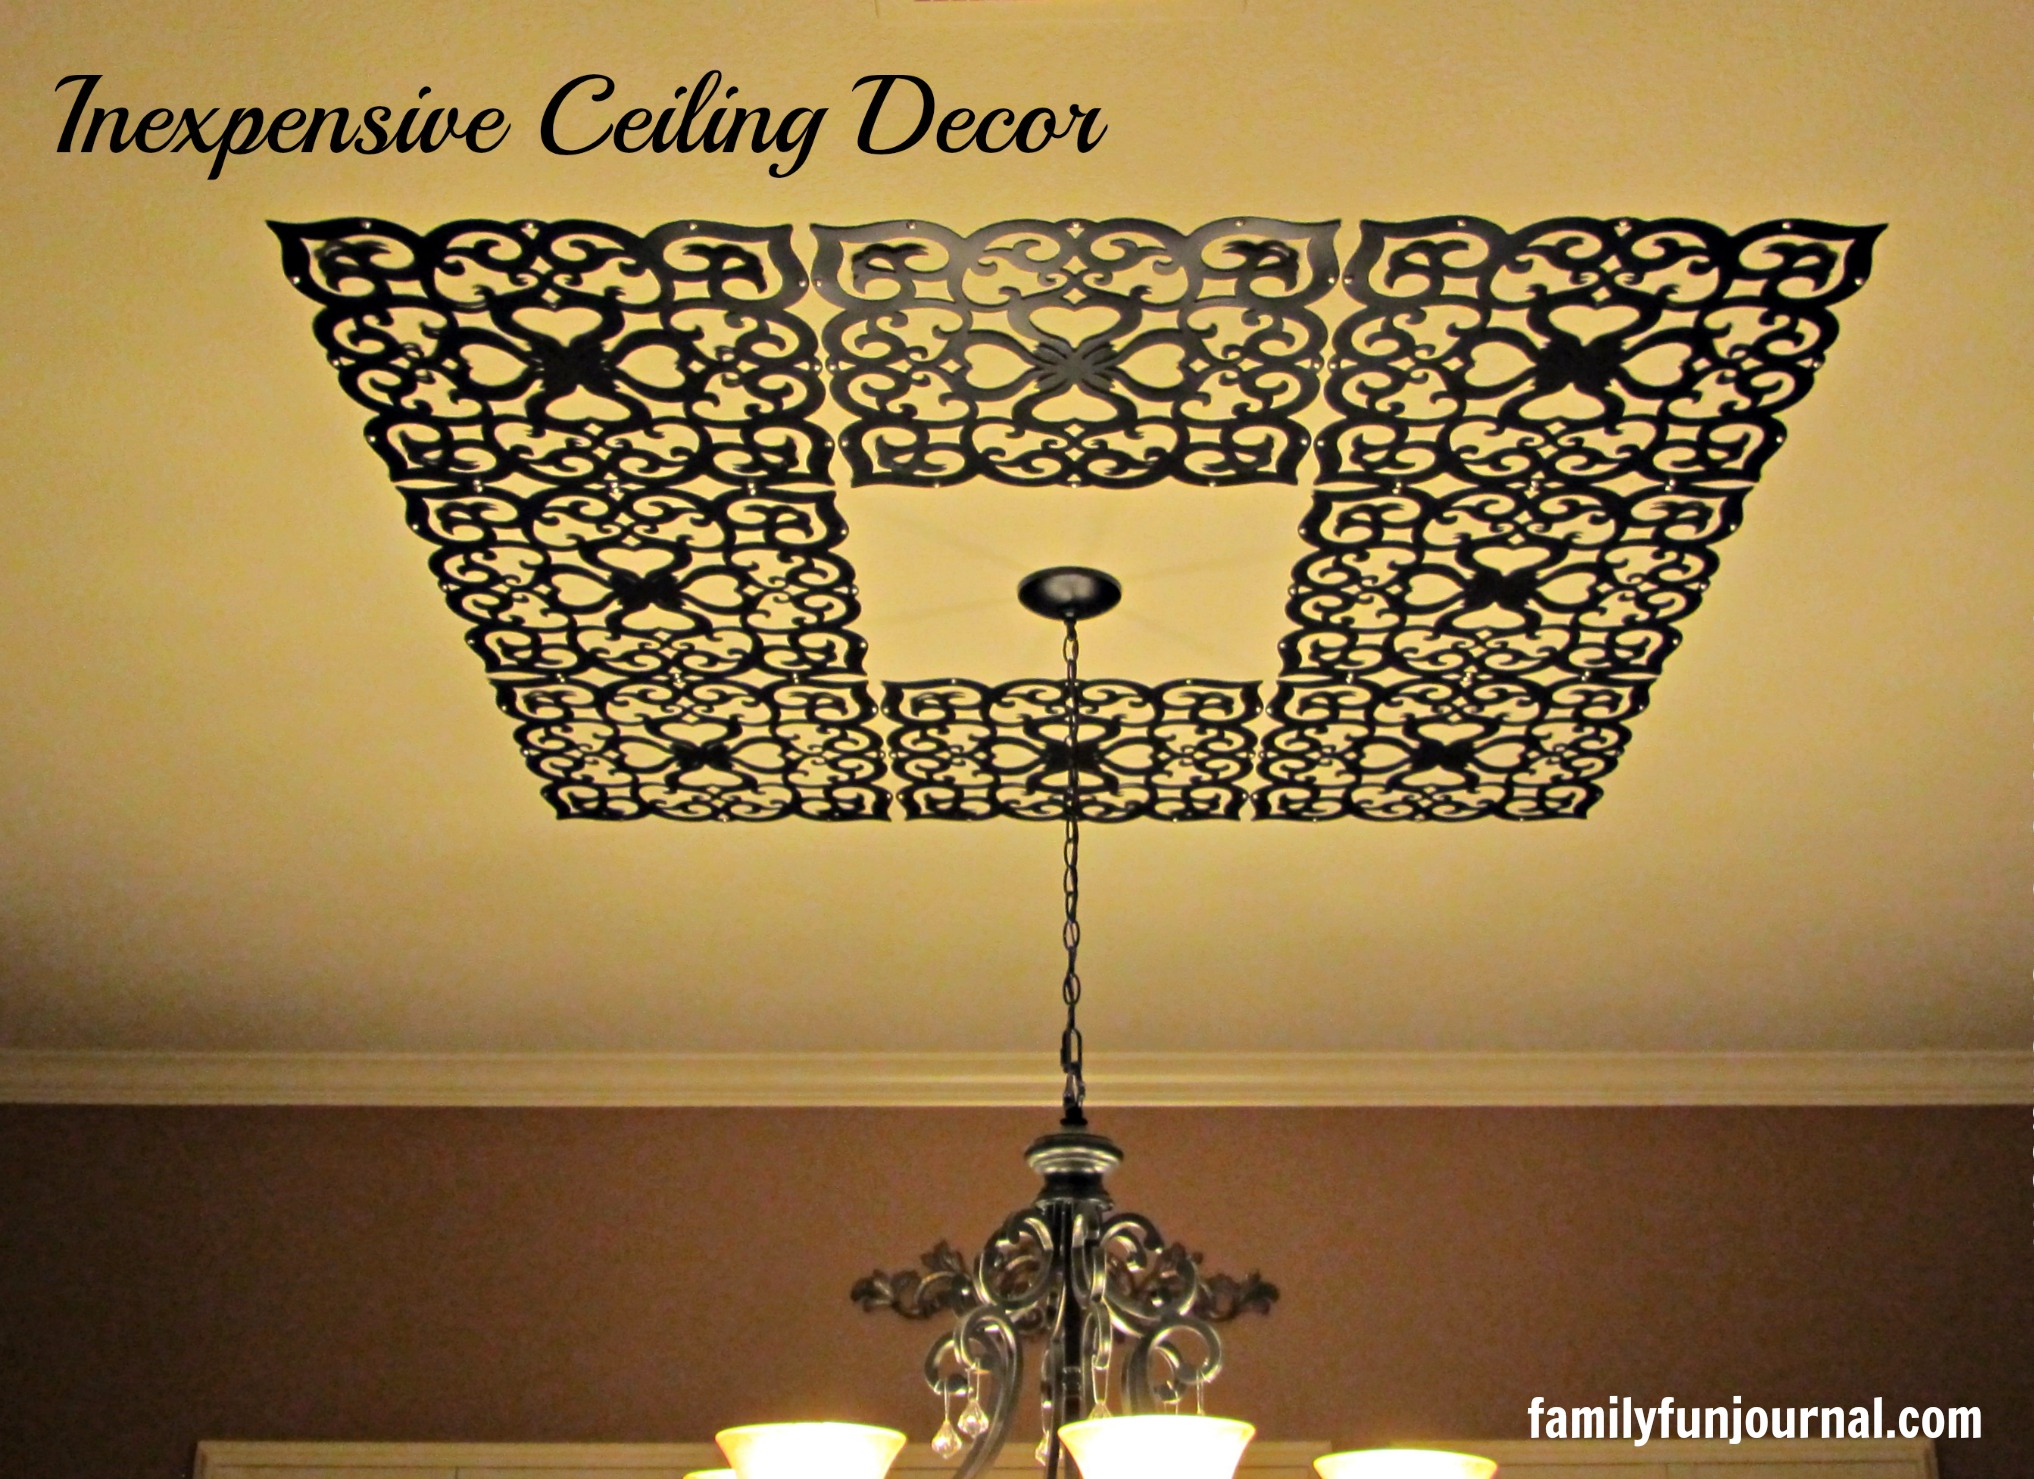 Container Store Ceiling Decor - Family Fun Journal